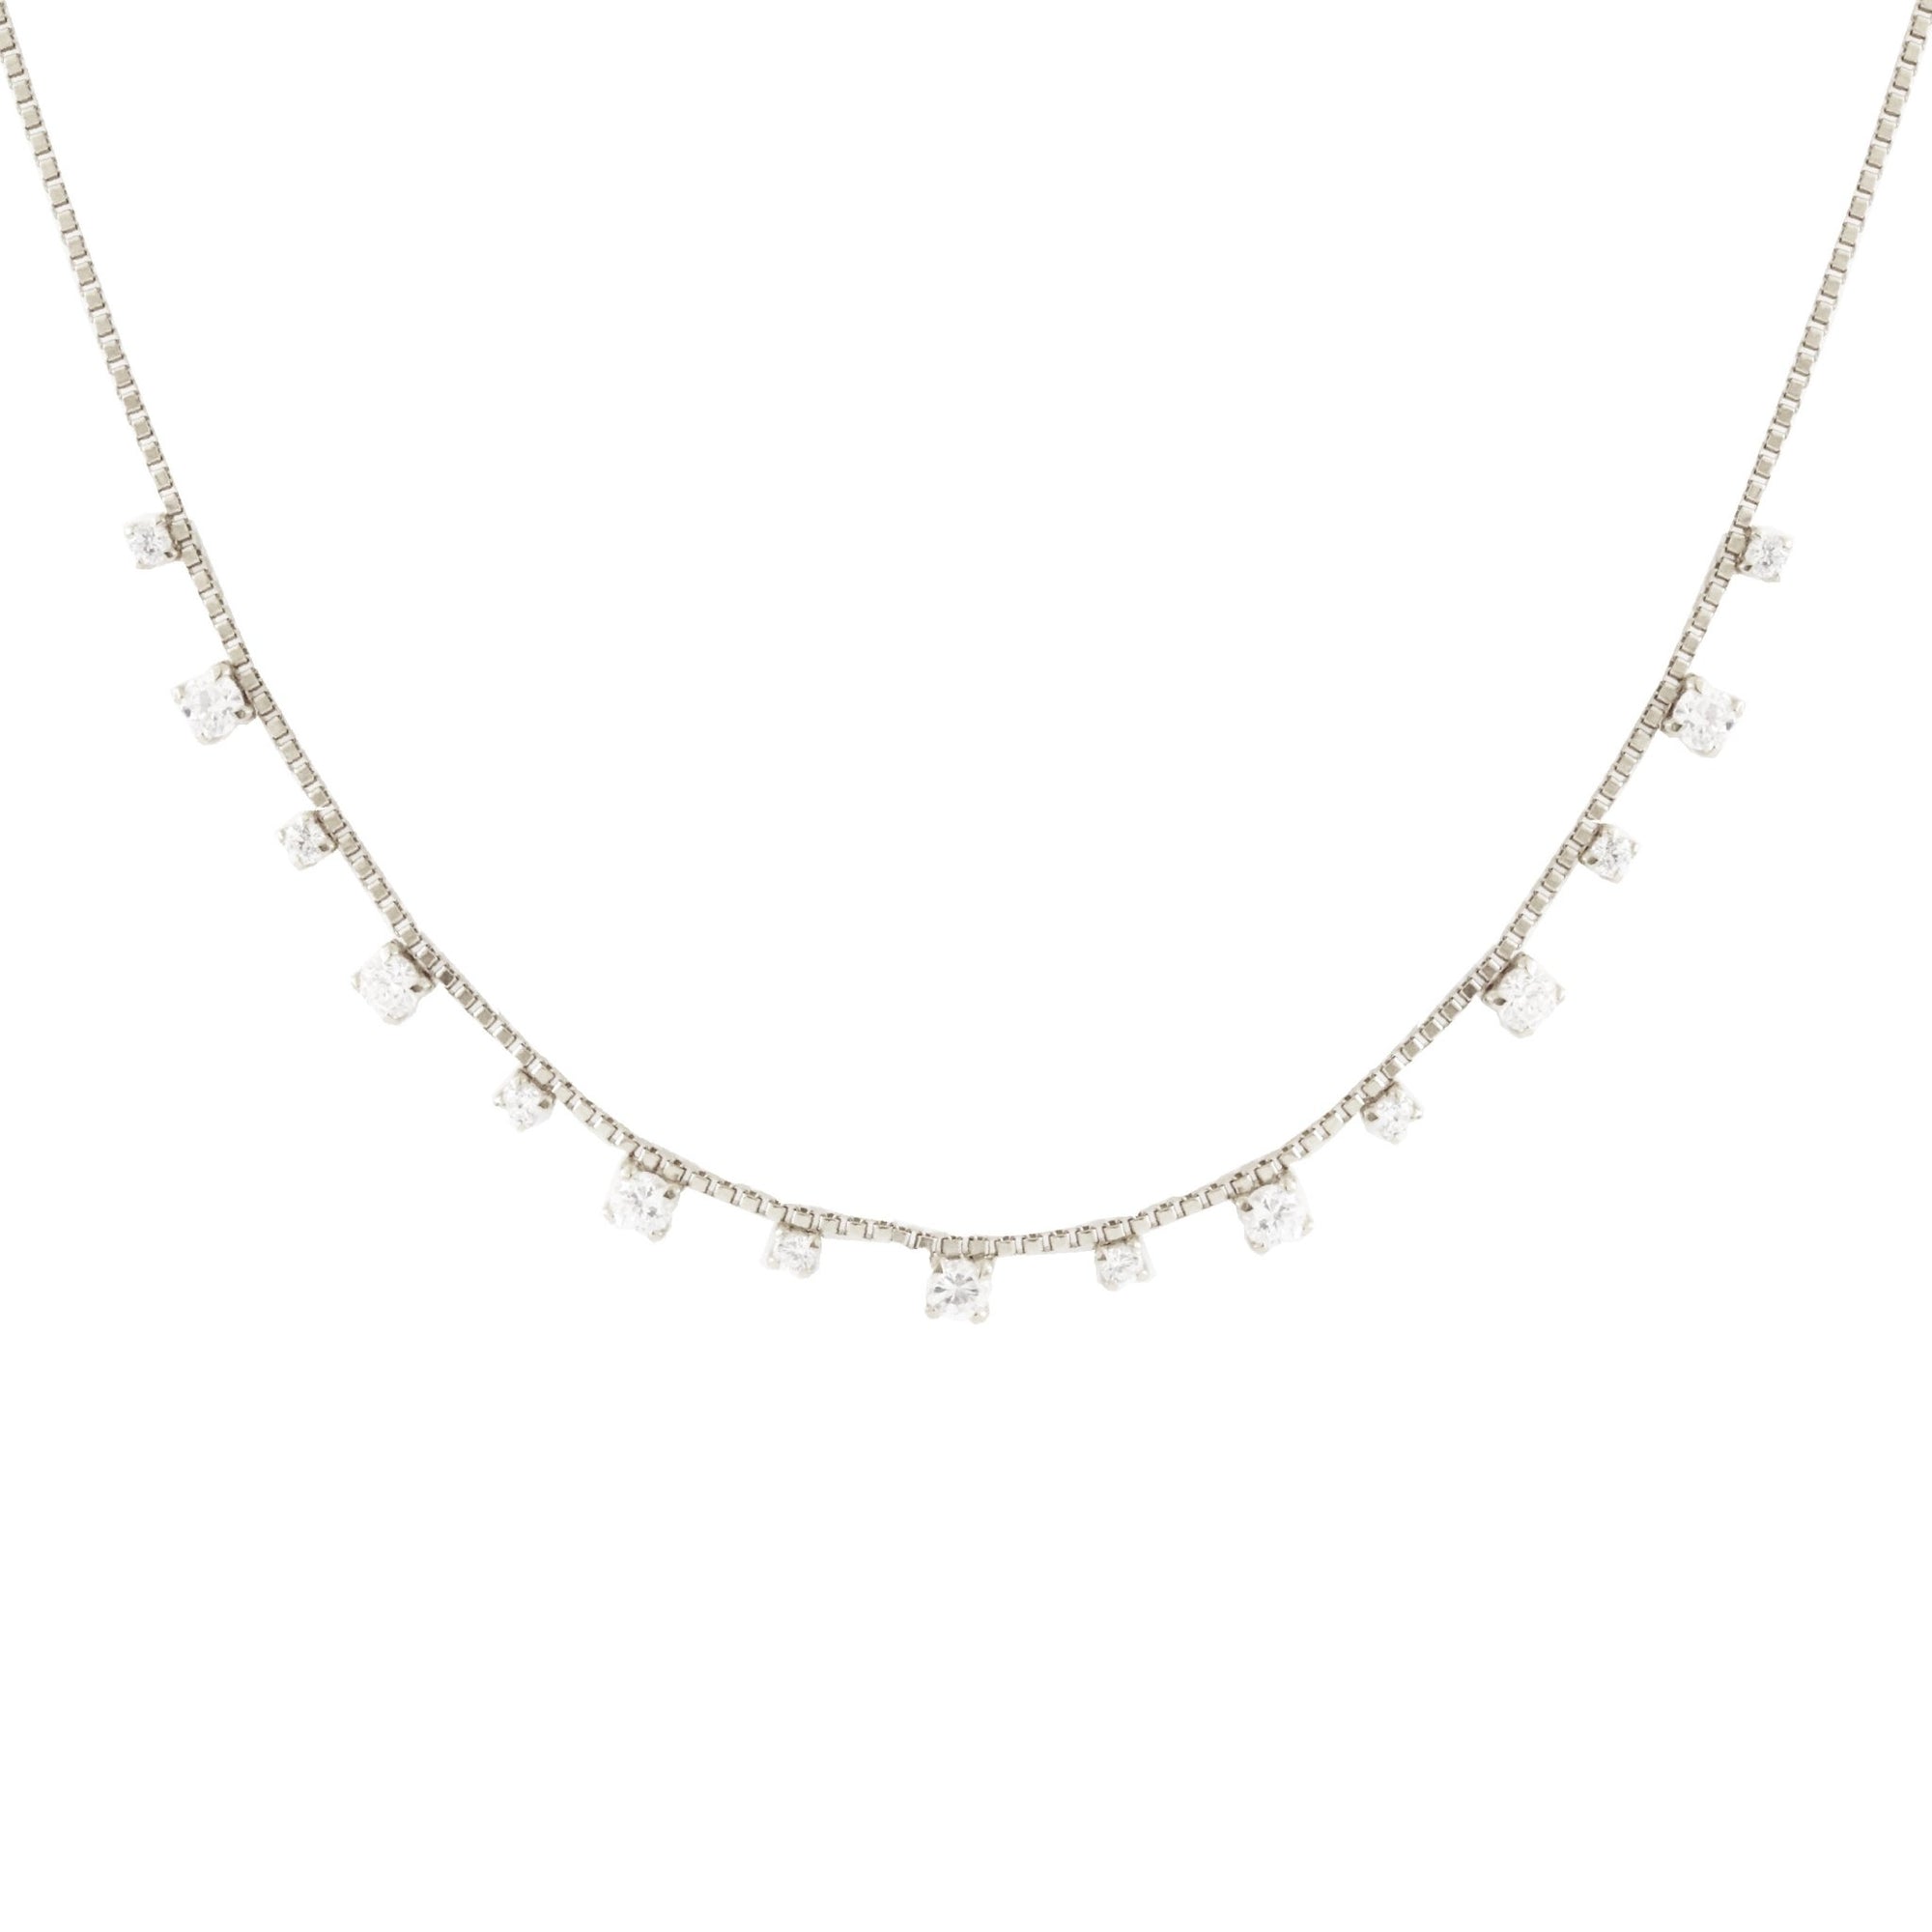 SCATTERED LOVE COLLAR NECKLACE - CUBIC ZIRCONIA & SILVER - SO PRETTY CARA COTTER